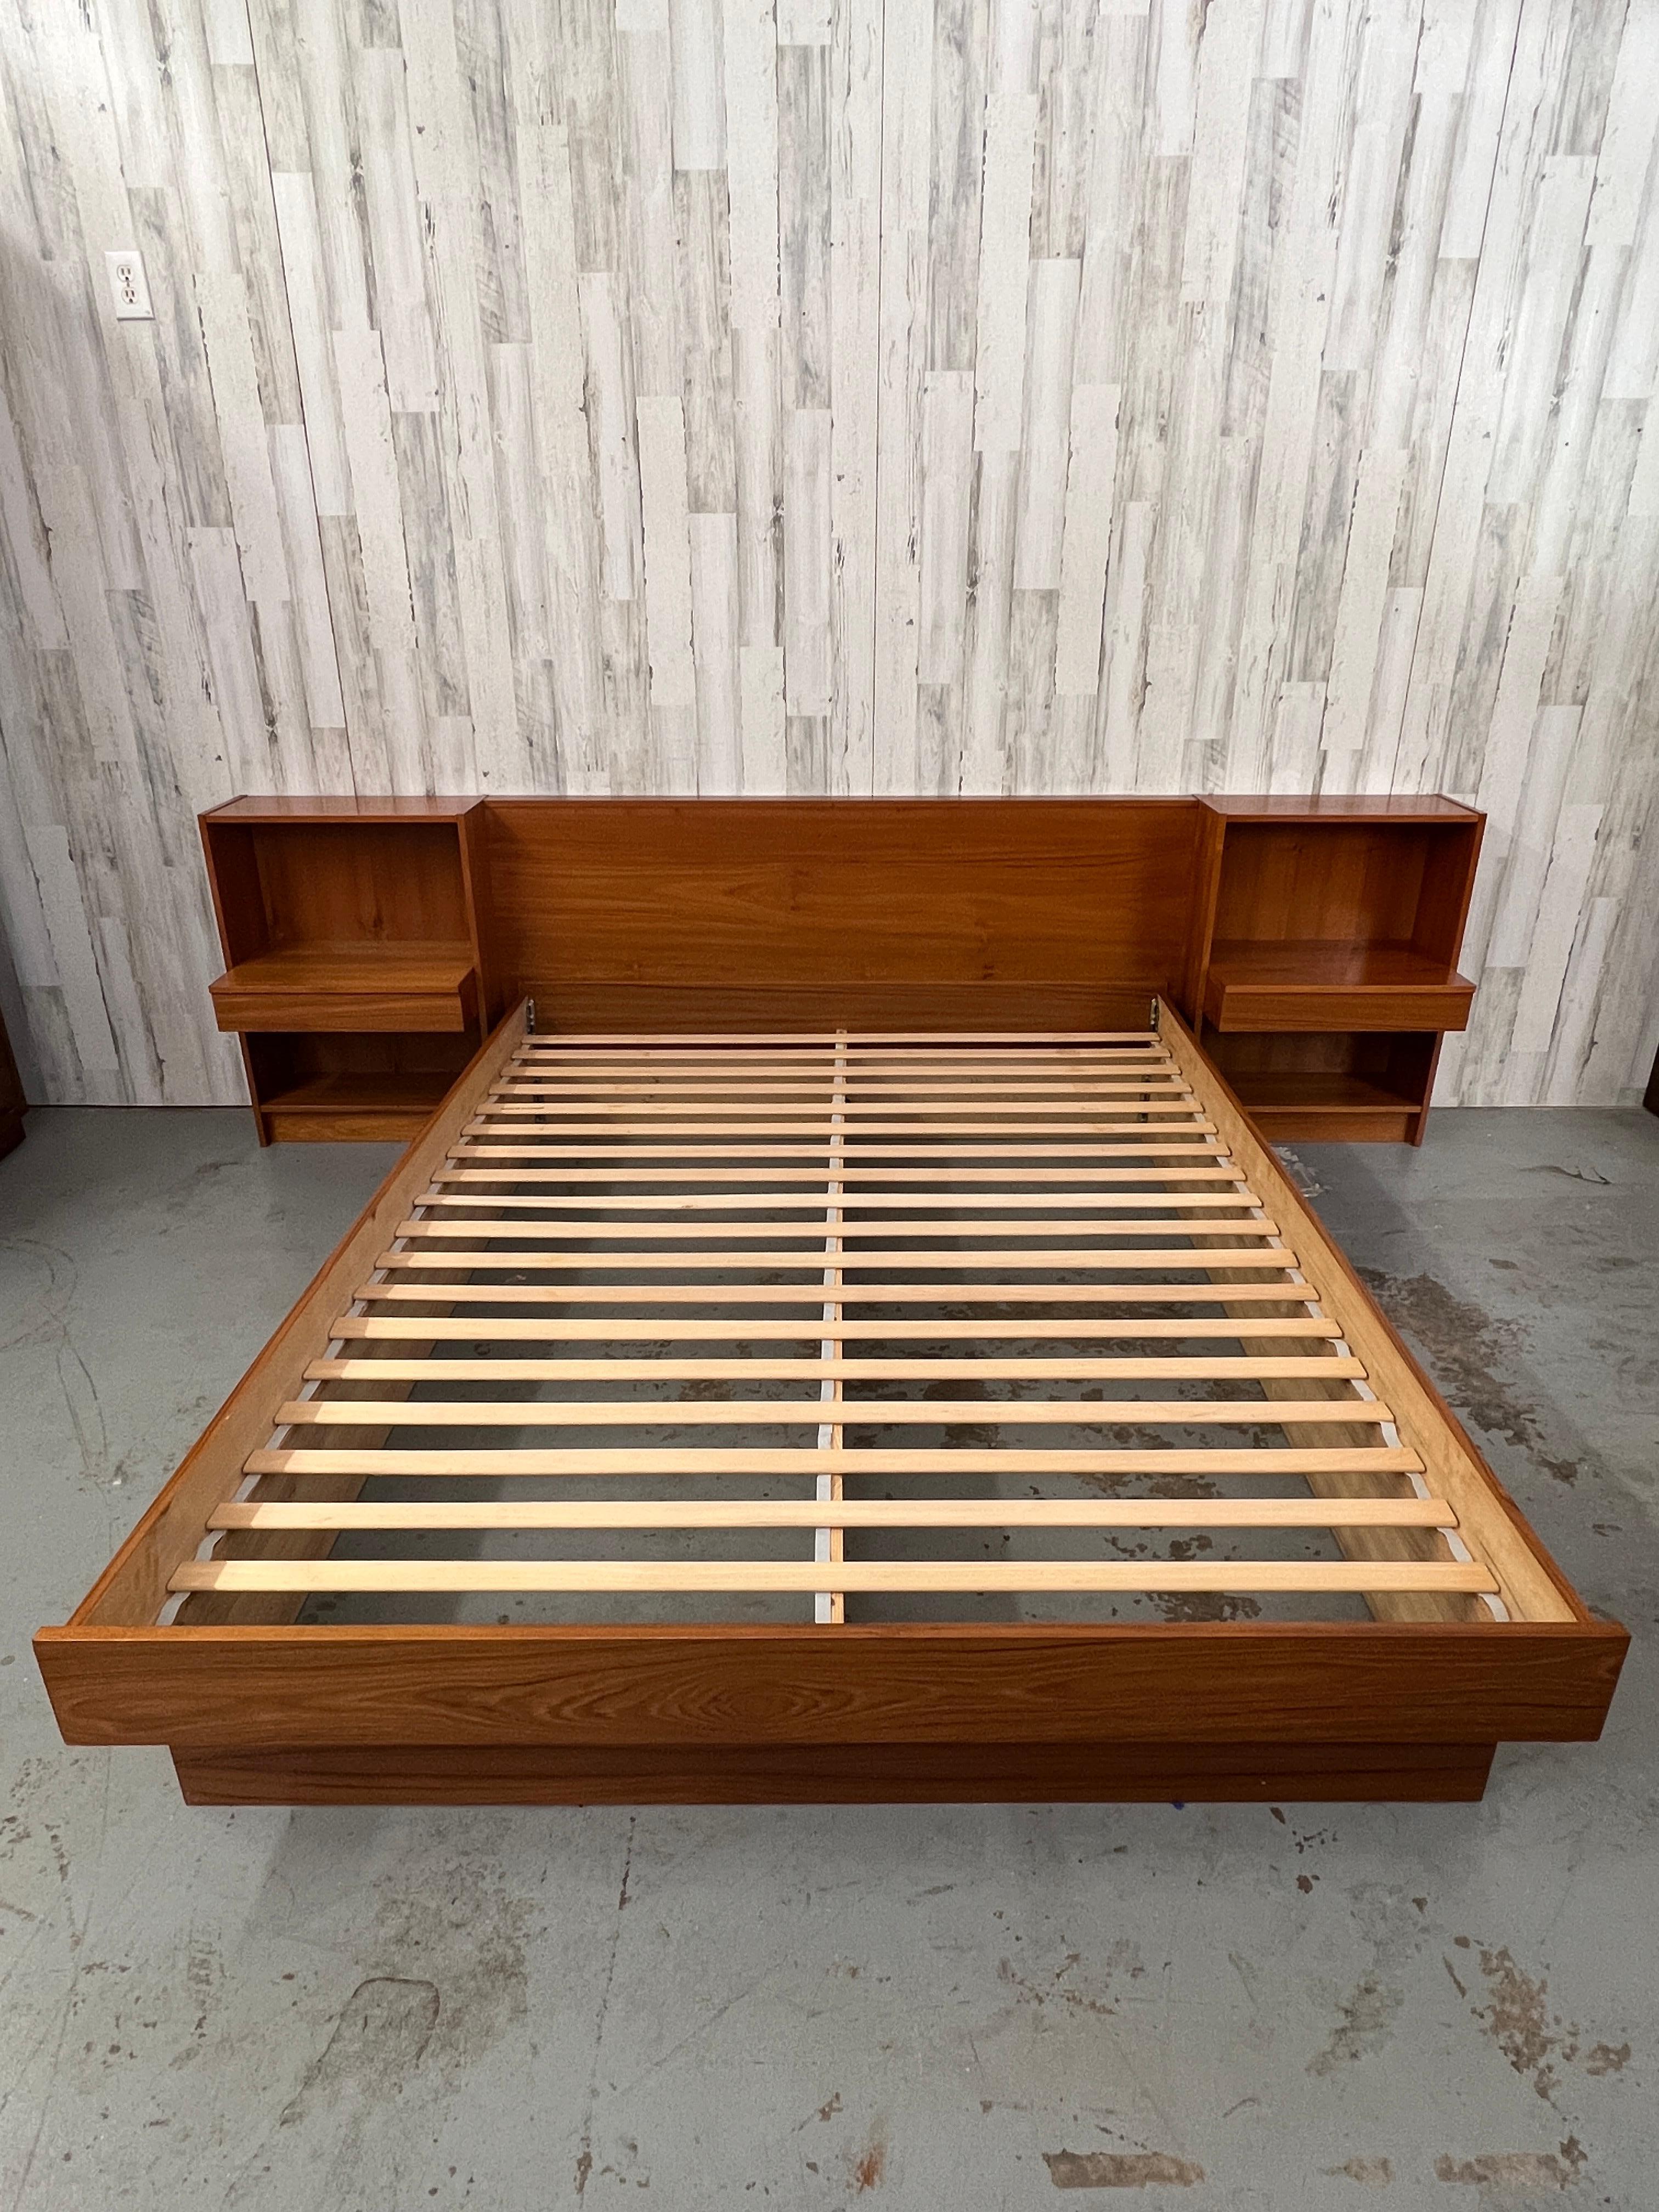 Danish Platform bed & nightstands- Queen Size. The nightstands bolt to the headboard for a very sturdy unit.

Bed frame only: 81.25 L x 61.75 W
Each nightstand: 23.25 L x 15 D x 31.75 H
Headboard Length: 65.5
Height of footboard 14.75.